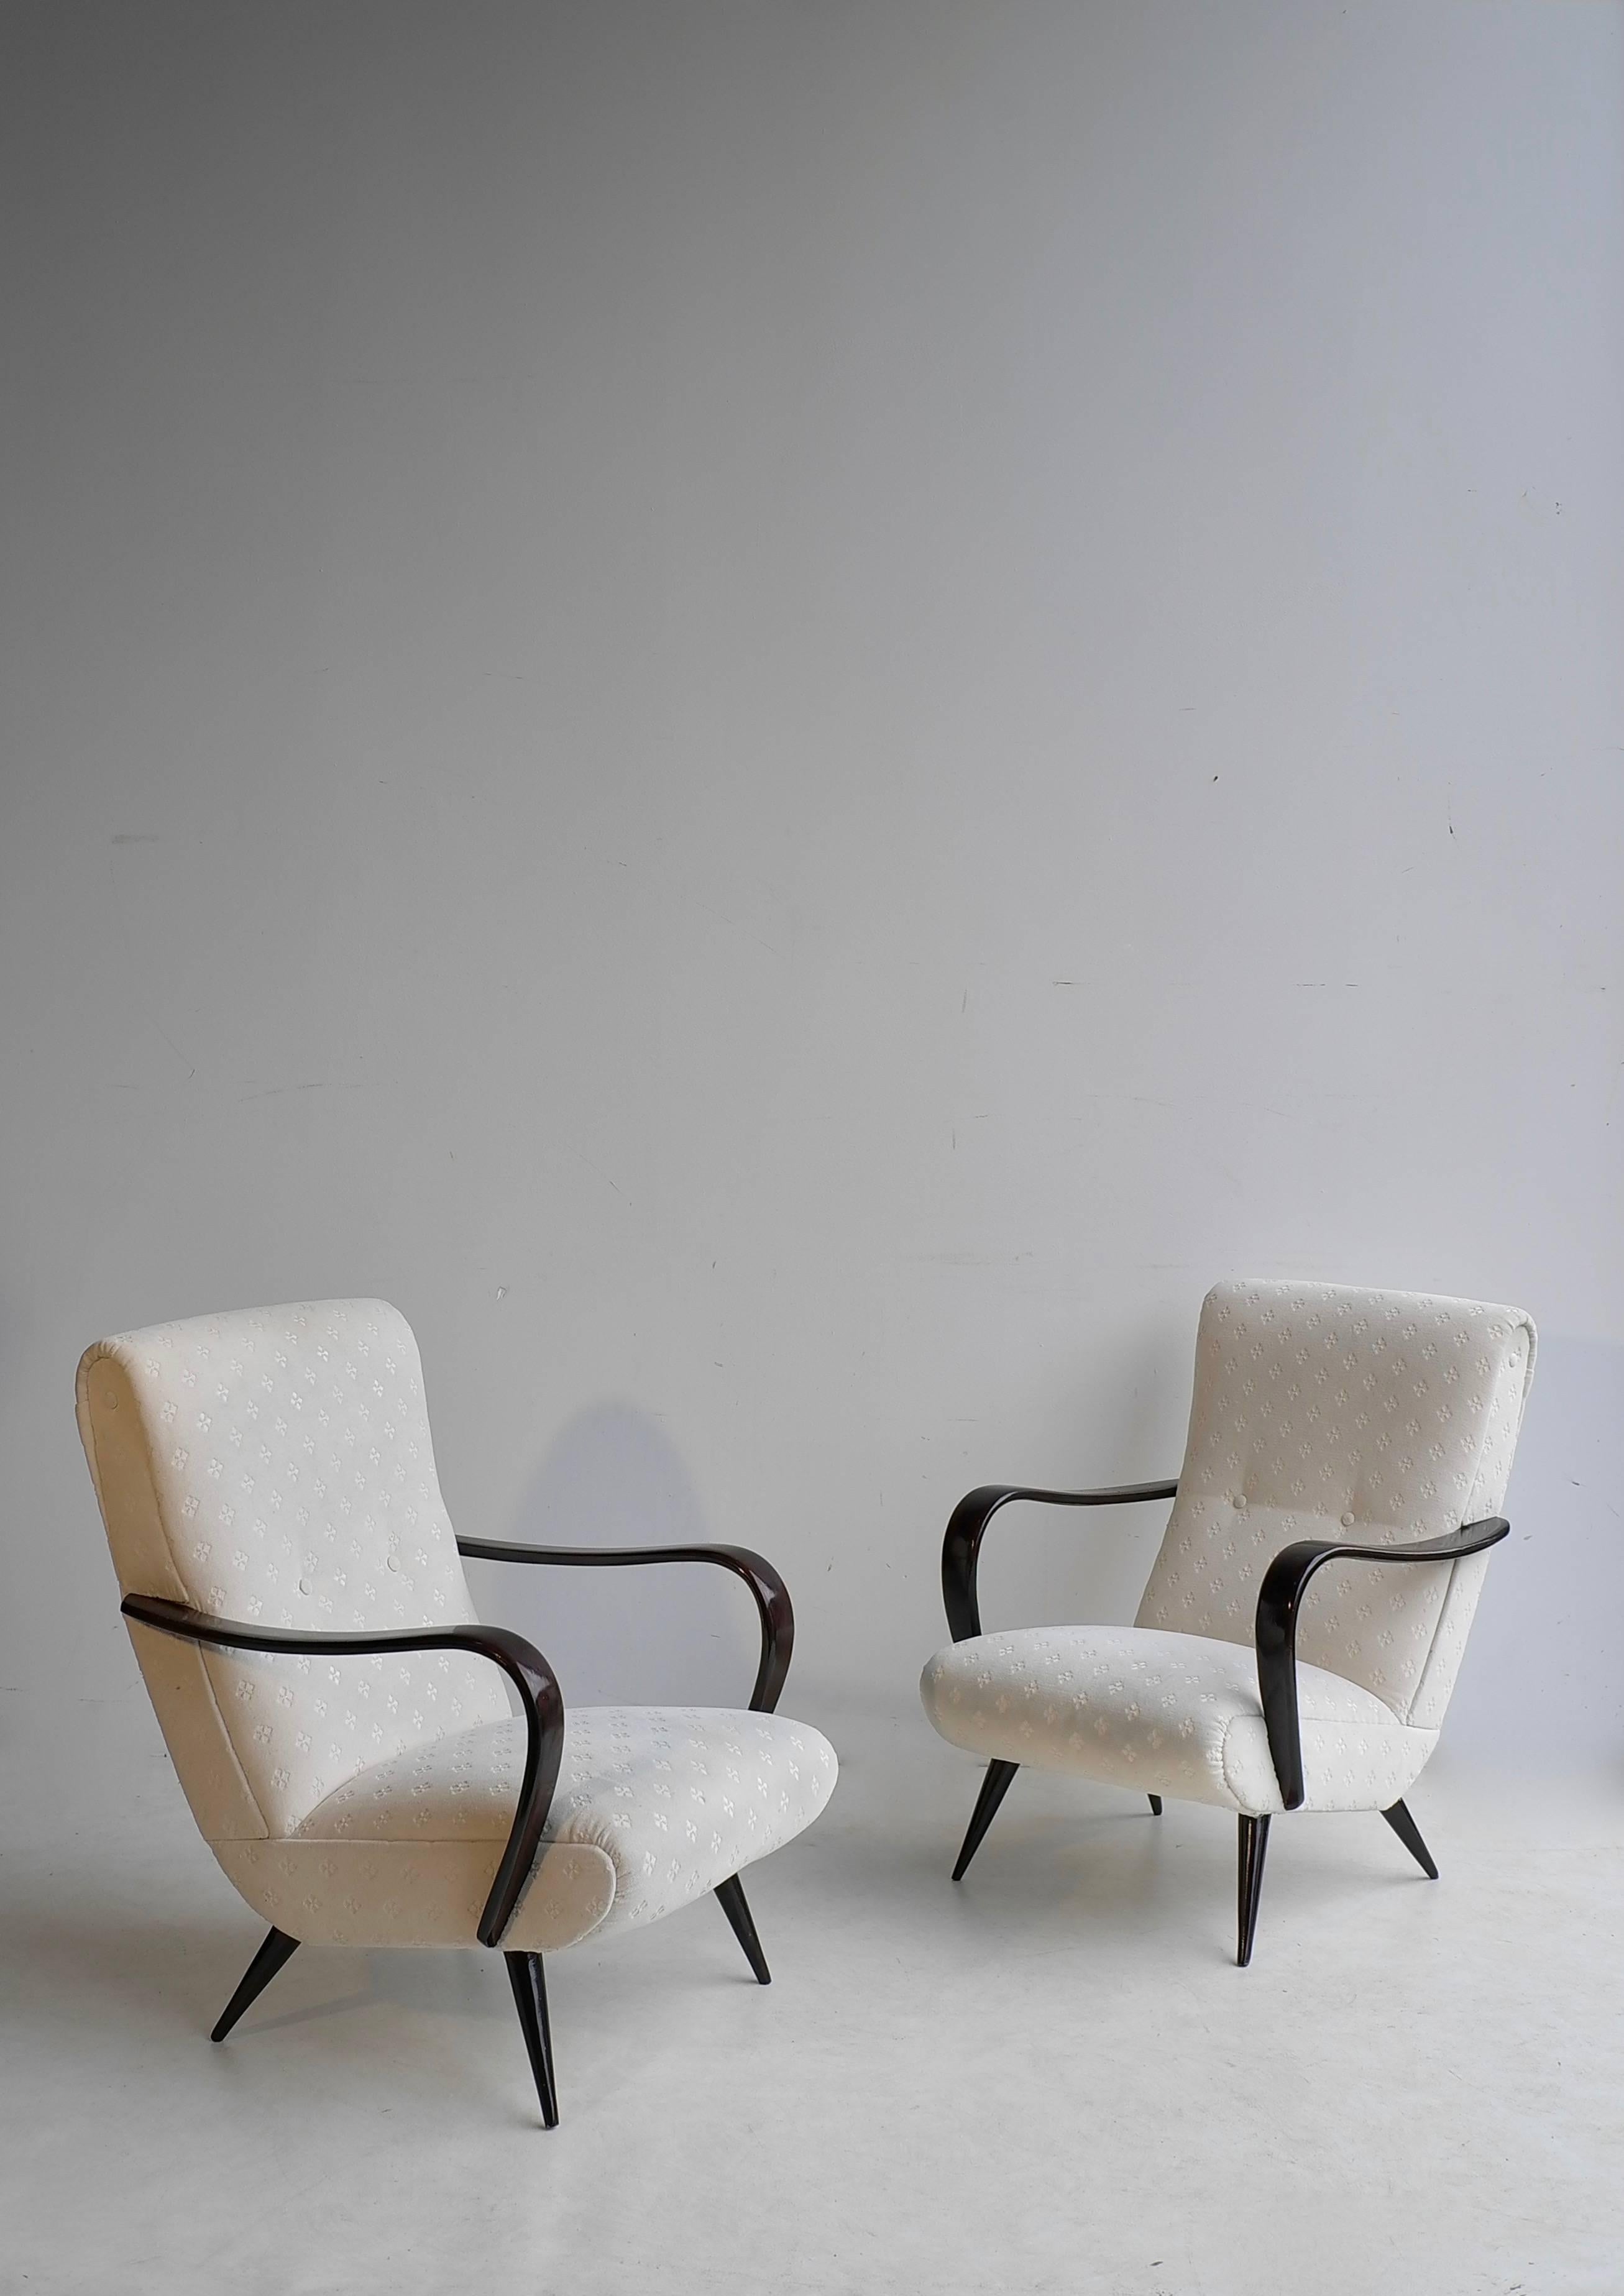 Mid-20th Century Pair of Sculptural Lounge Chairs with Curved Wooden Armrests, Italy, 1950s